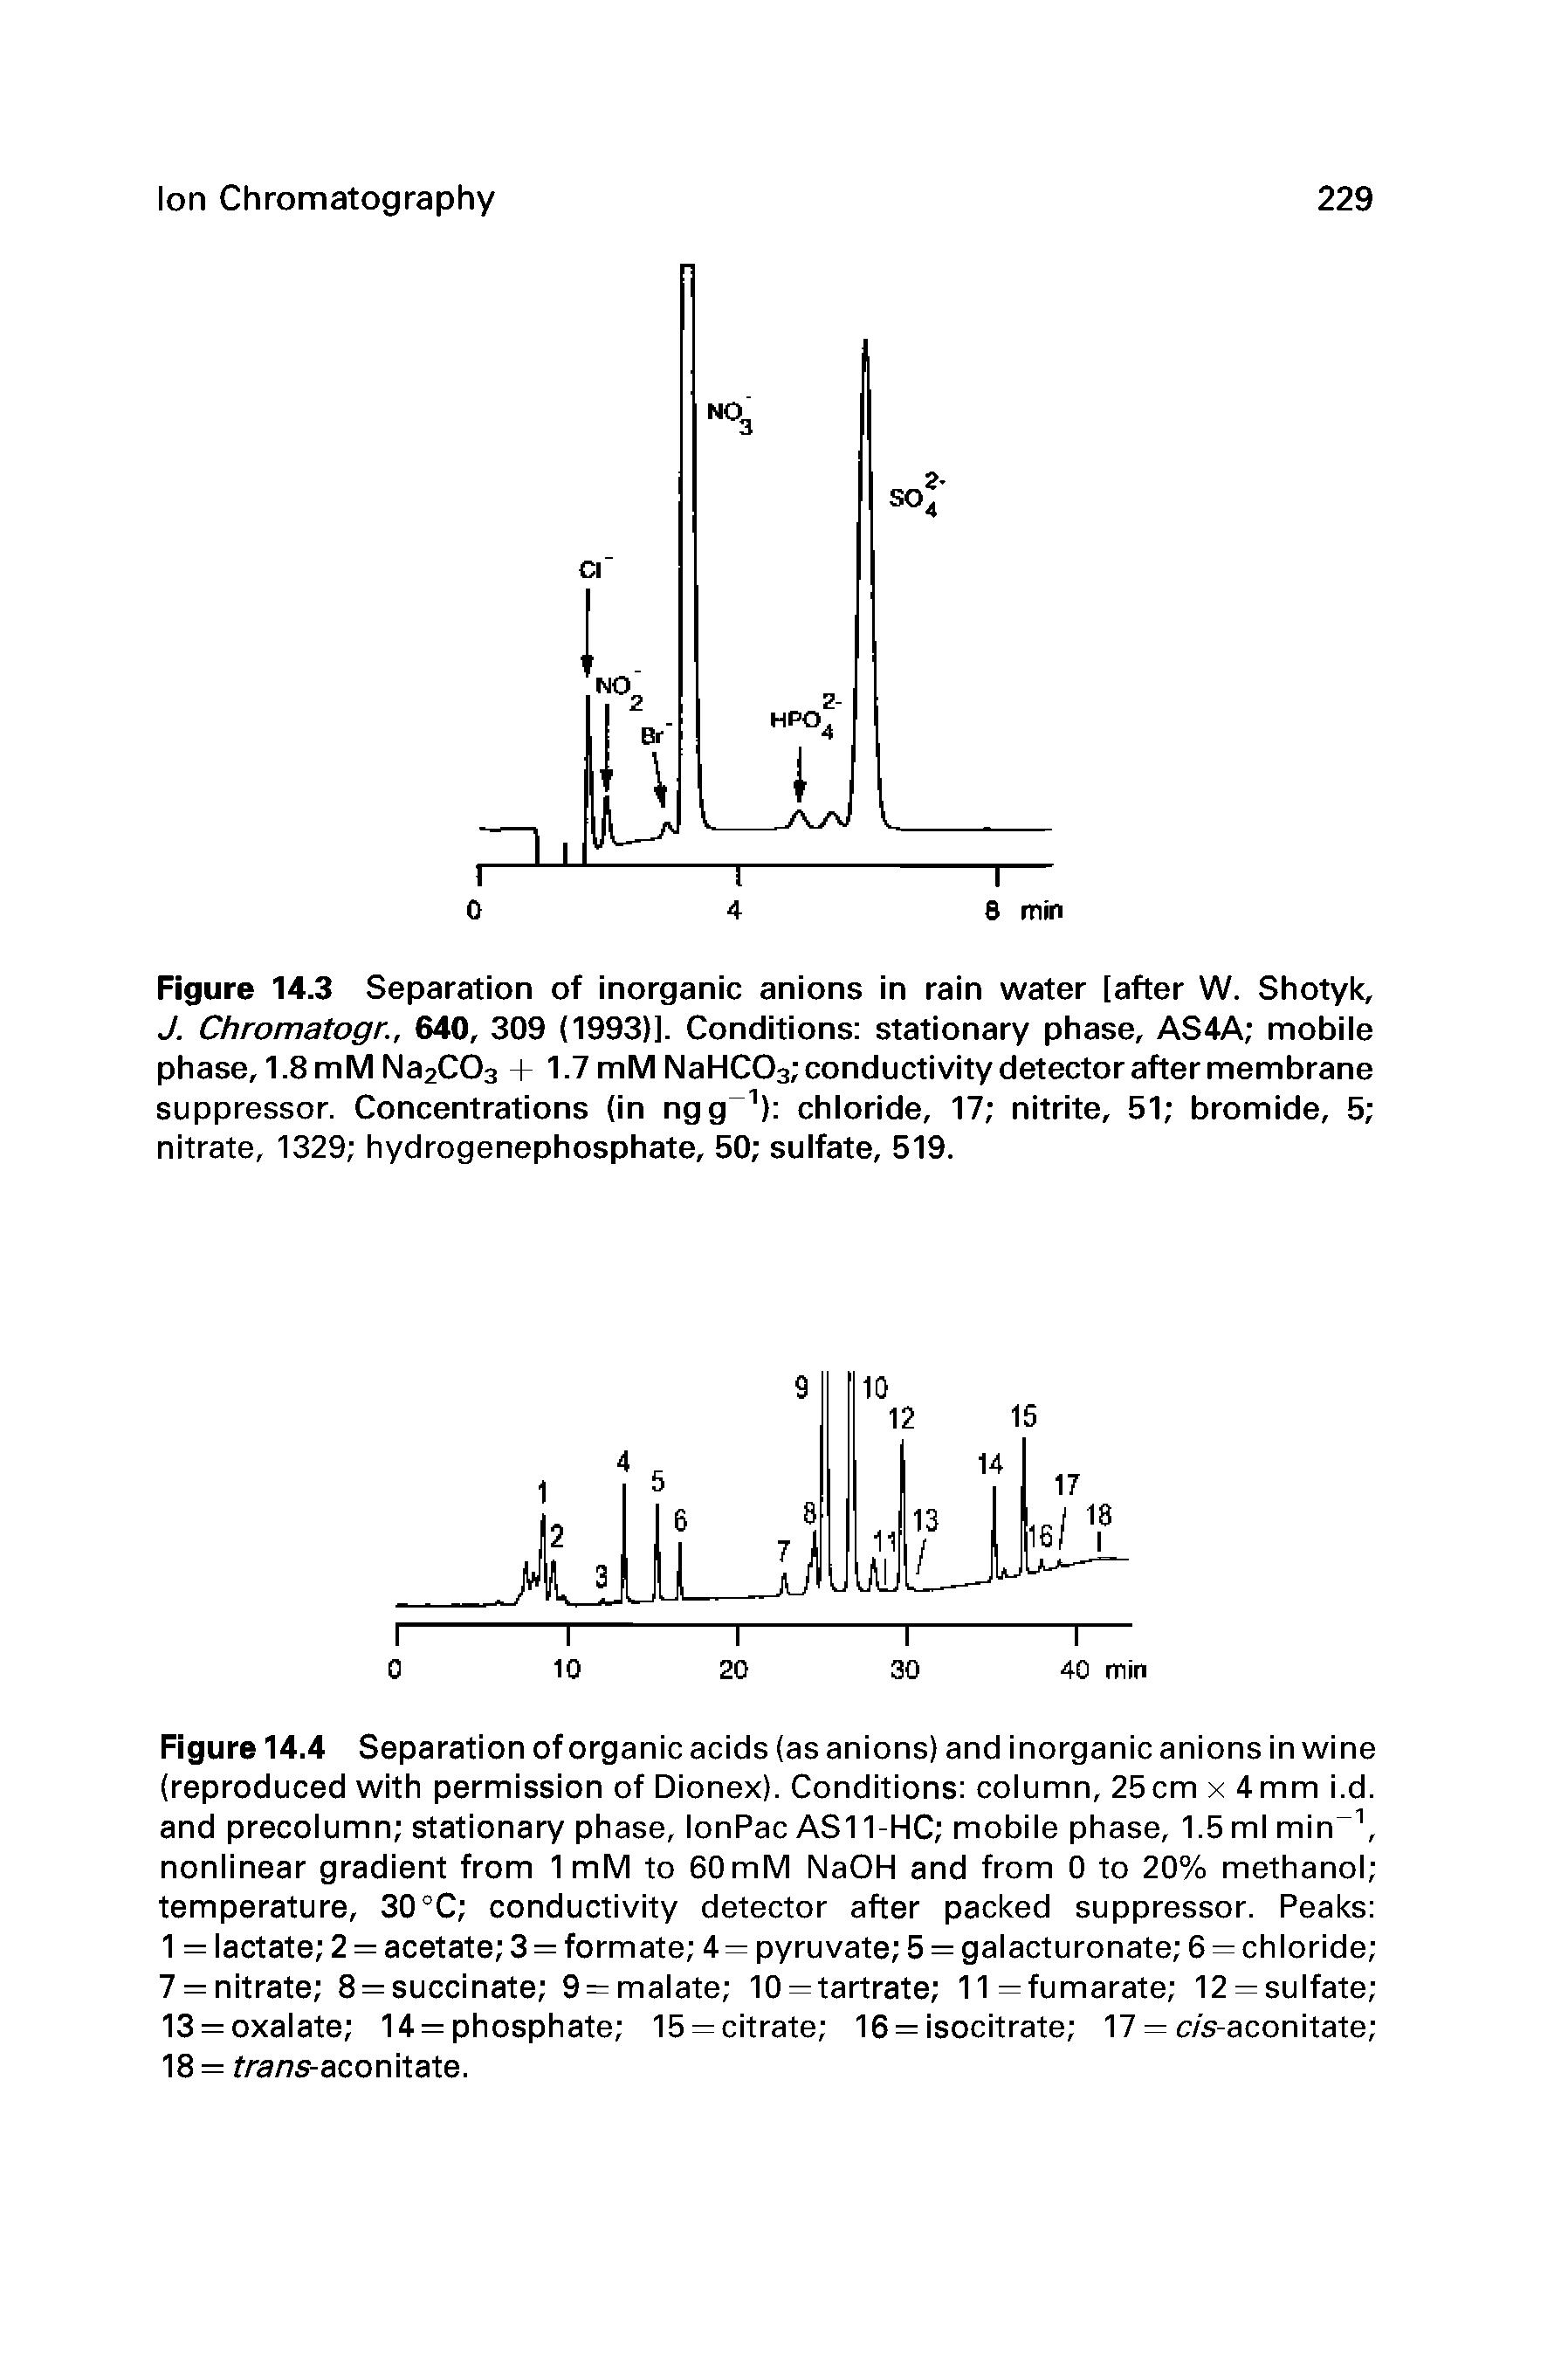 Figure 14.4 Separation of organic acids (as anions) and inorganic anions in wine (reproduced with permission of Dionex). Conditions column, 25cm x 4mm i.d. and precolumn stationary phase, lonPac AS11-HC mobile phase, 1.5 ml min nonlinear gradient from 1 mM to 60mM NaOH and from 0 to 20% methanol temperature, 30°C conductivity detector after packed suppressor. Peaks 1 = lactate 2 = acetate 3 = formate 4 = pyruvate 5 = galacturonate 6 = chloride 7 = nitrate 8 = succinate 9 = malate 10 —tartrate 11—fumarate 12 —sulfate 13 = oxalate 14 = phosphate 15 —citrate 16 = isocitrate 17 = c/s-aconitate 18 = frans-aconitate.